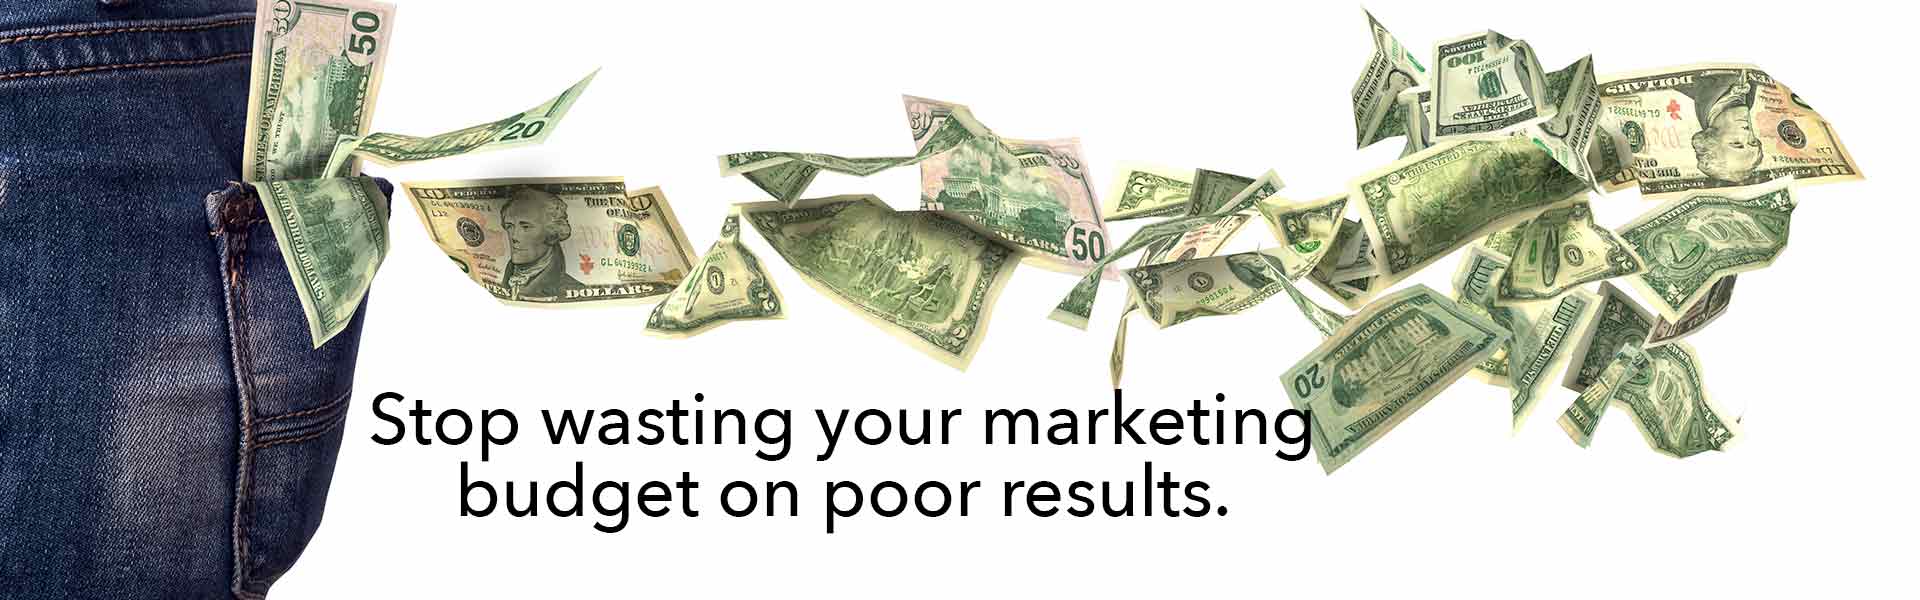 Stop wasting your marketing budget on poor results.